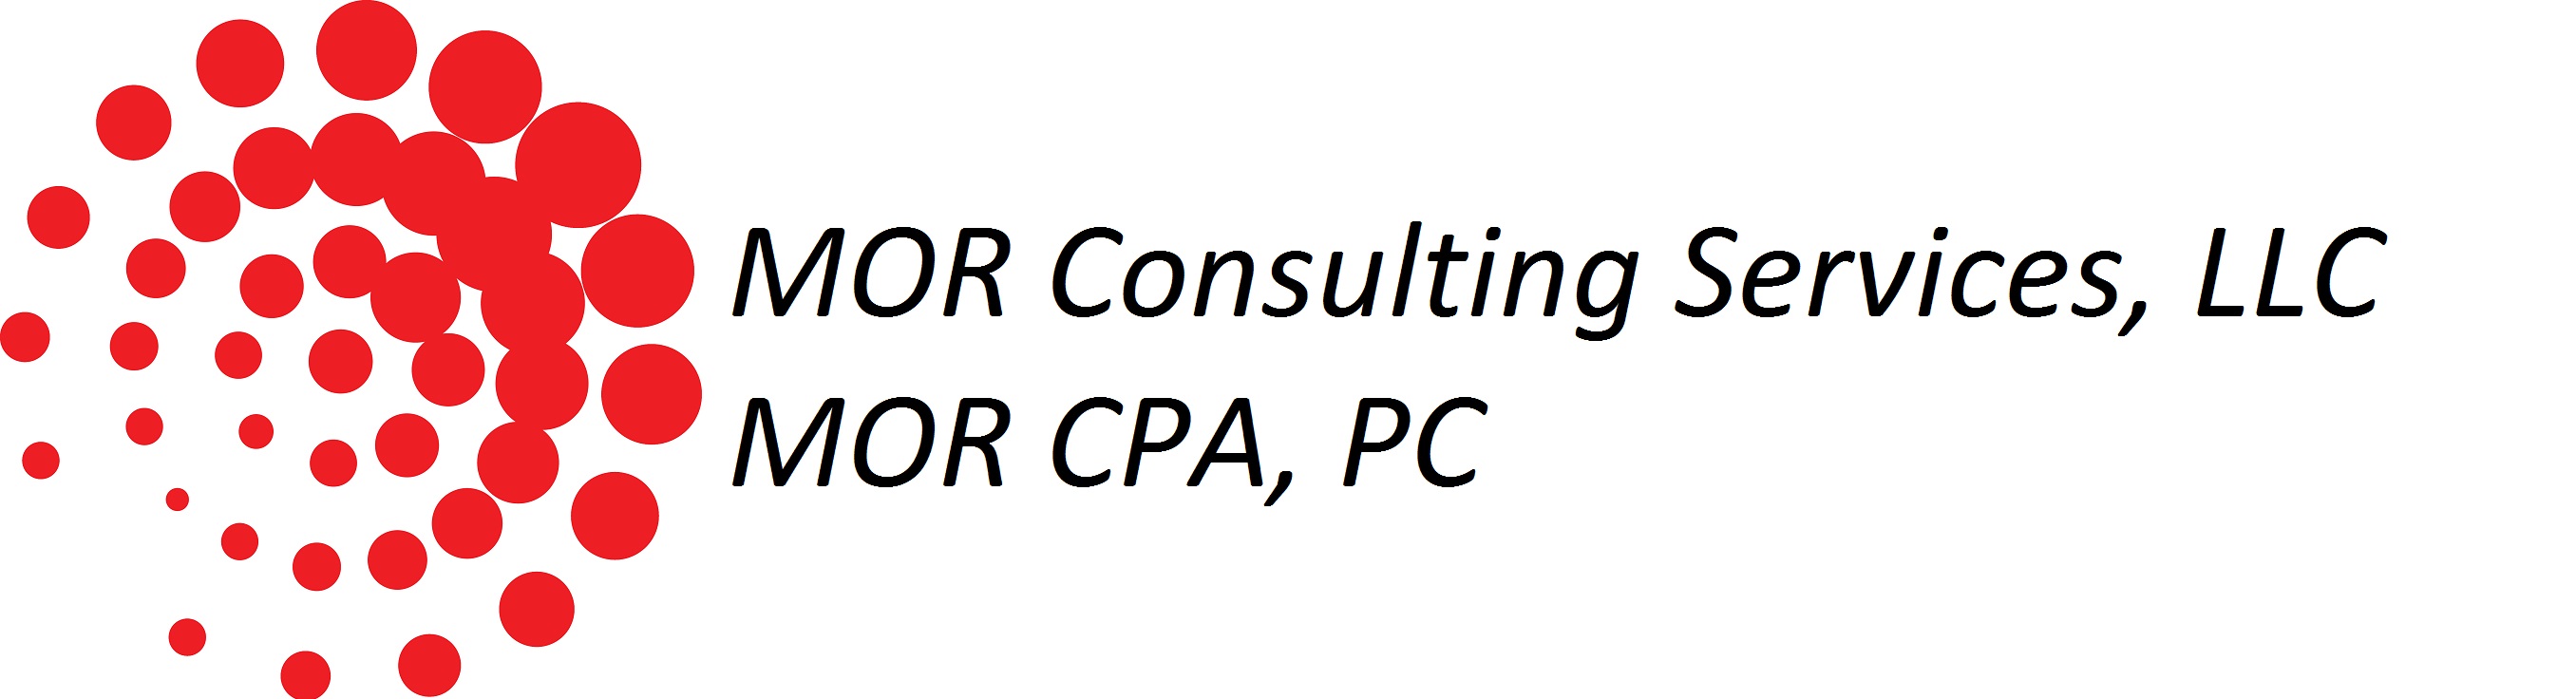 MOR Consulting Services